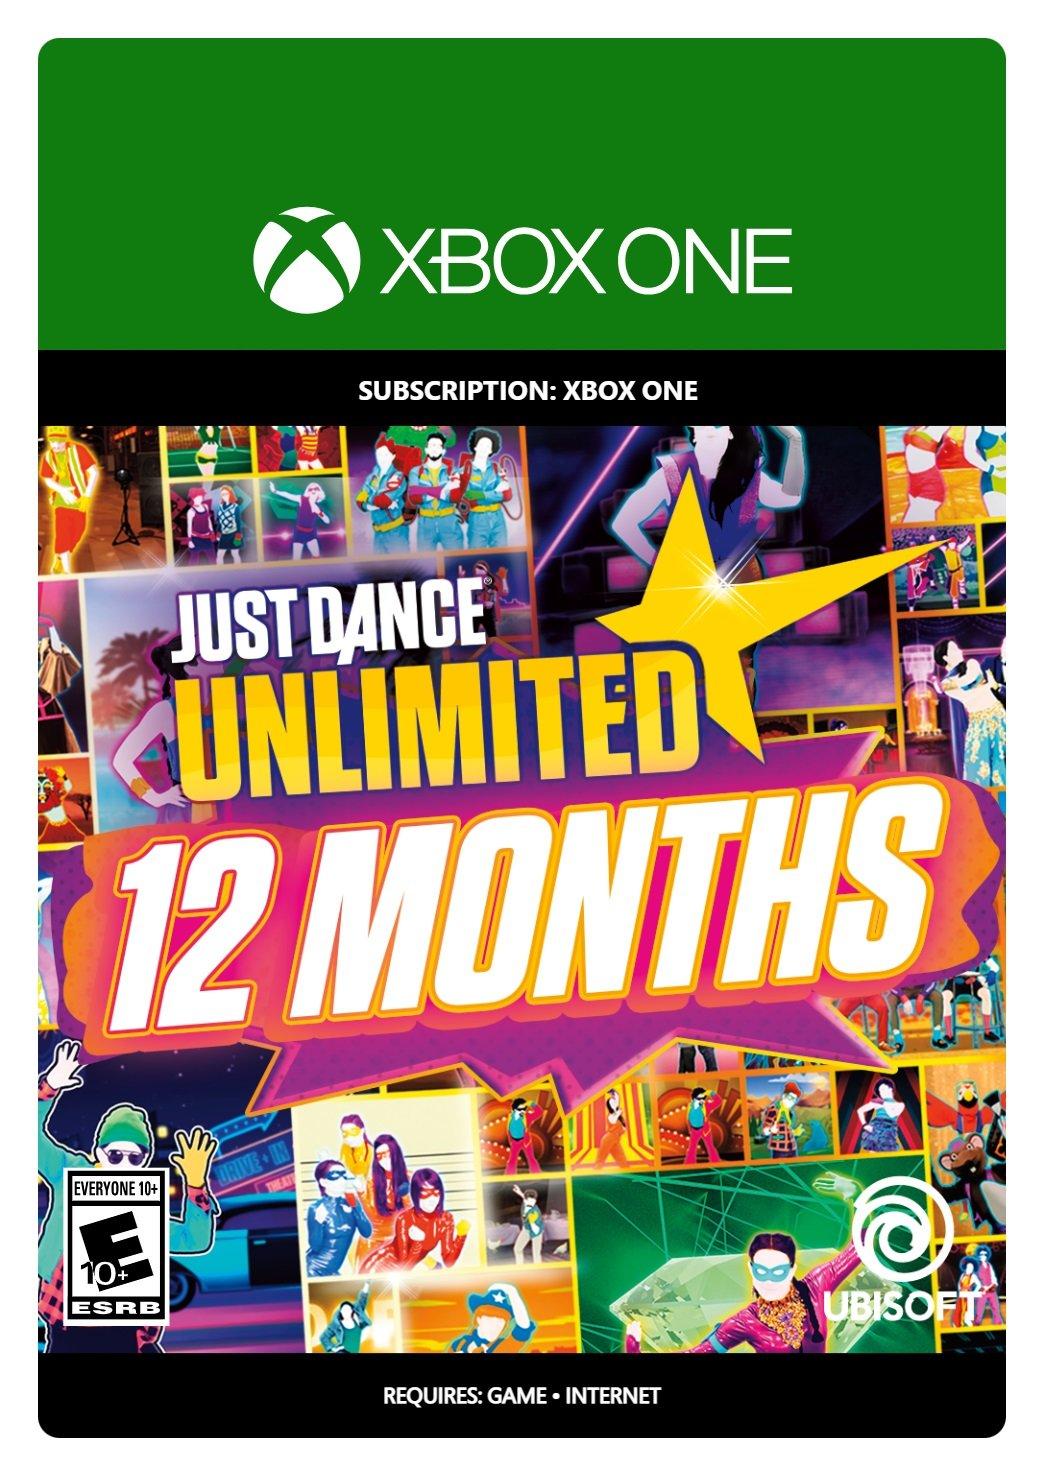 just dance switch unlimited price